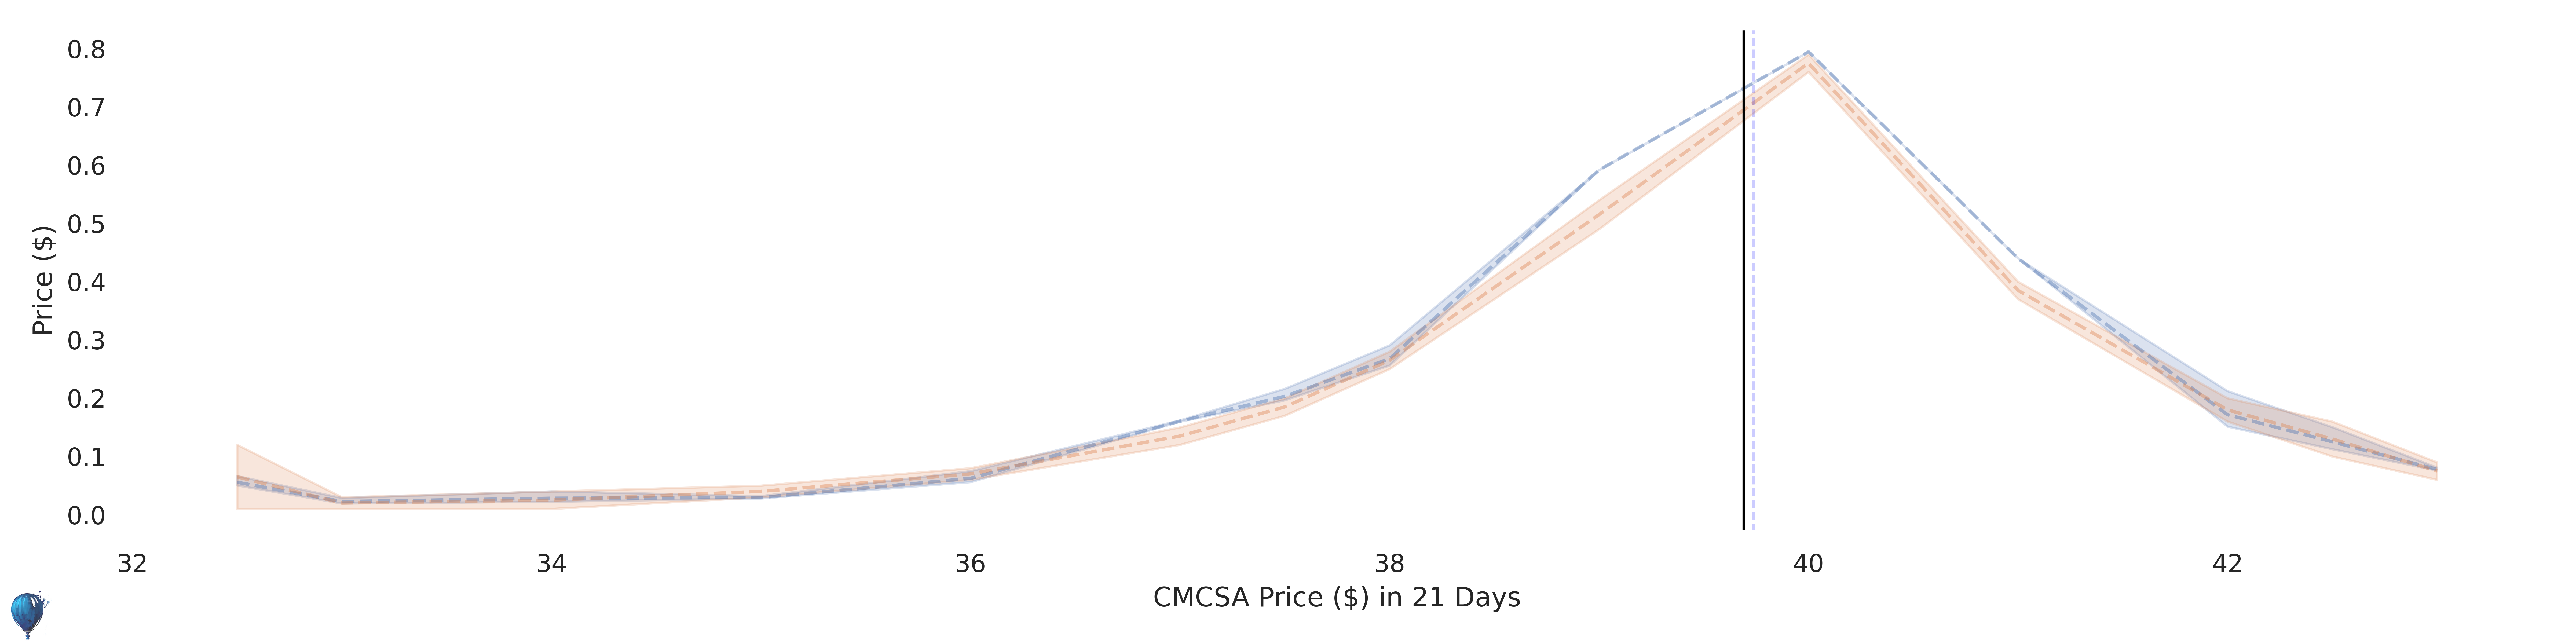 CMCSA current options pricing